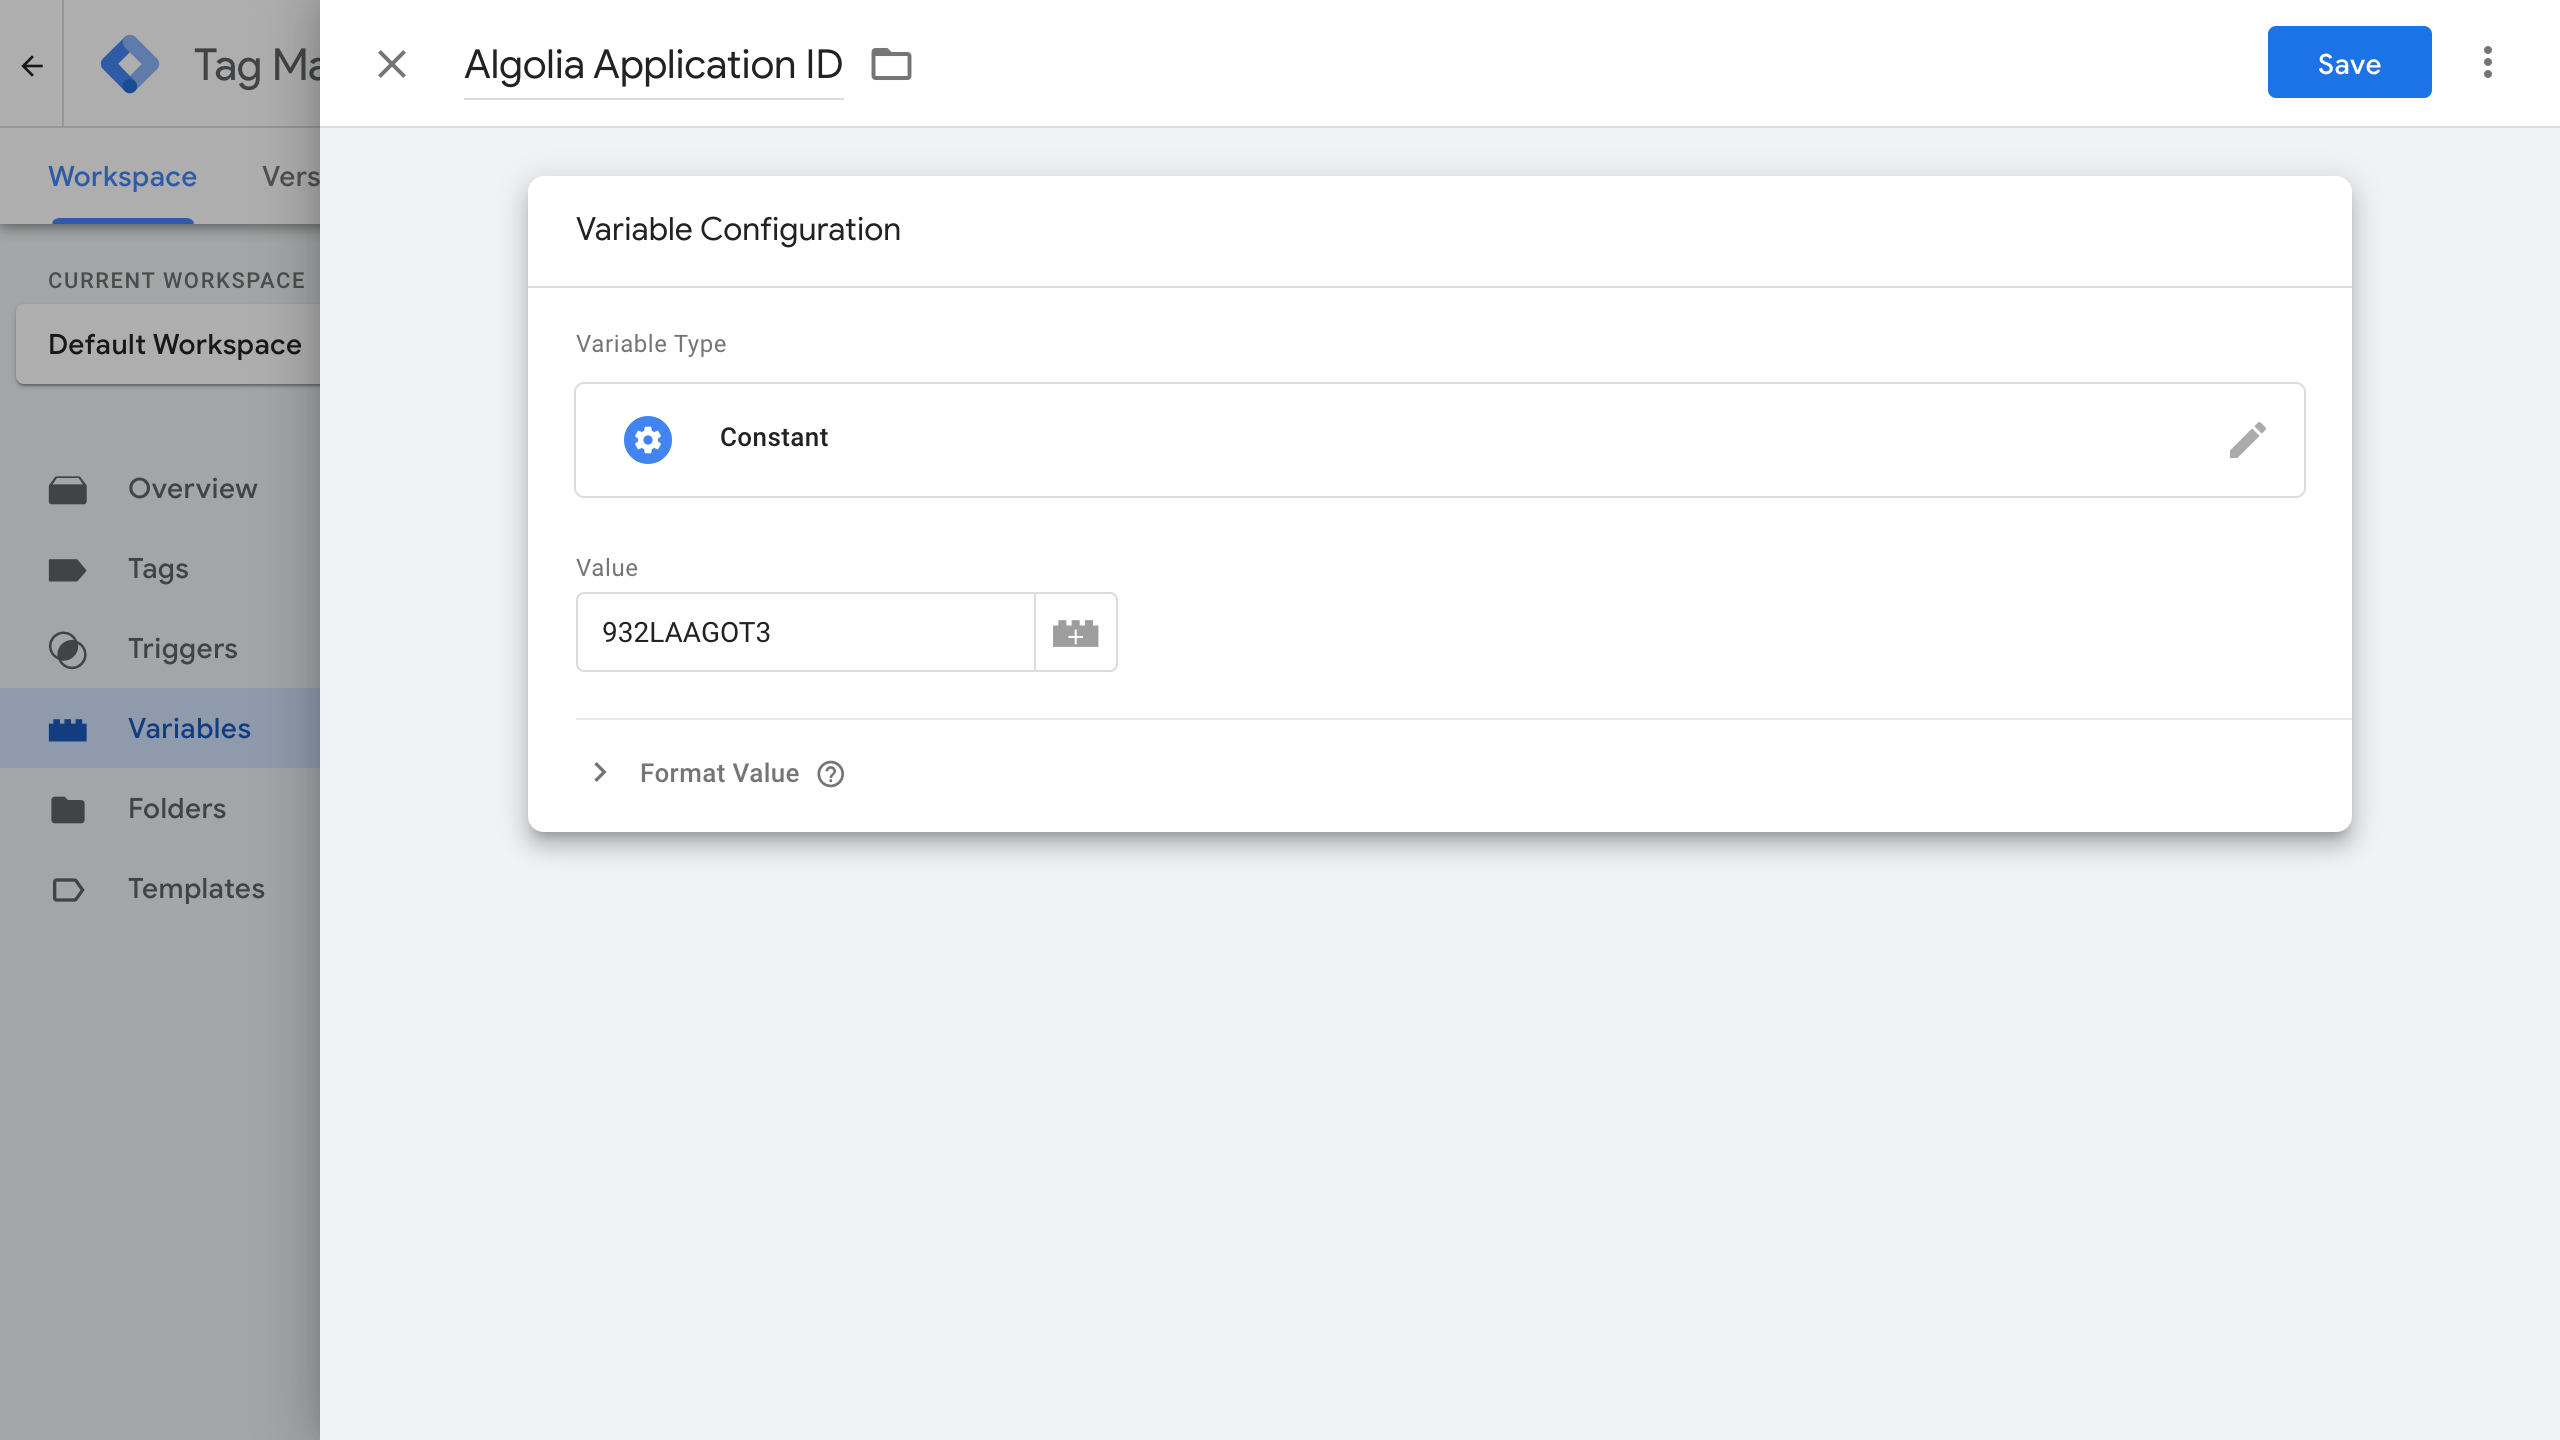 Save and add Algolia Application ID in GTM